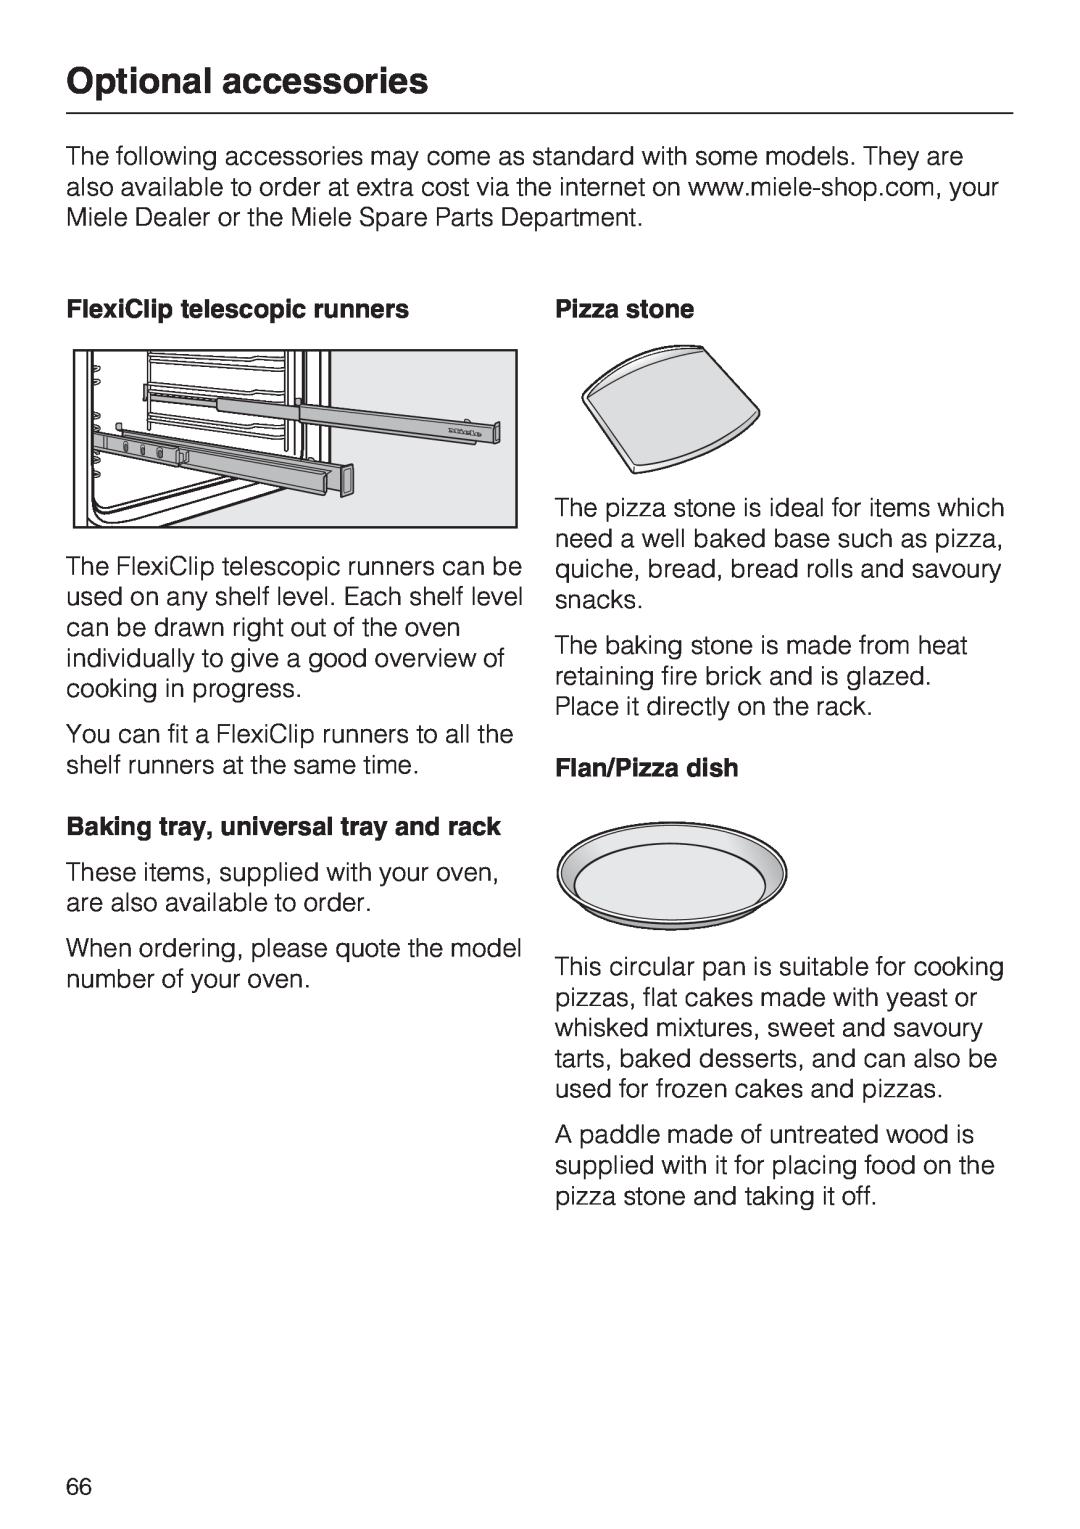 Miele H 5240 BP Optional accessories, FlexiClip telescopic runners, Flan/Pizza dish, Baking tray, universal tray and rack 